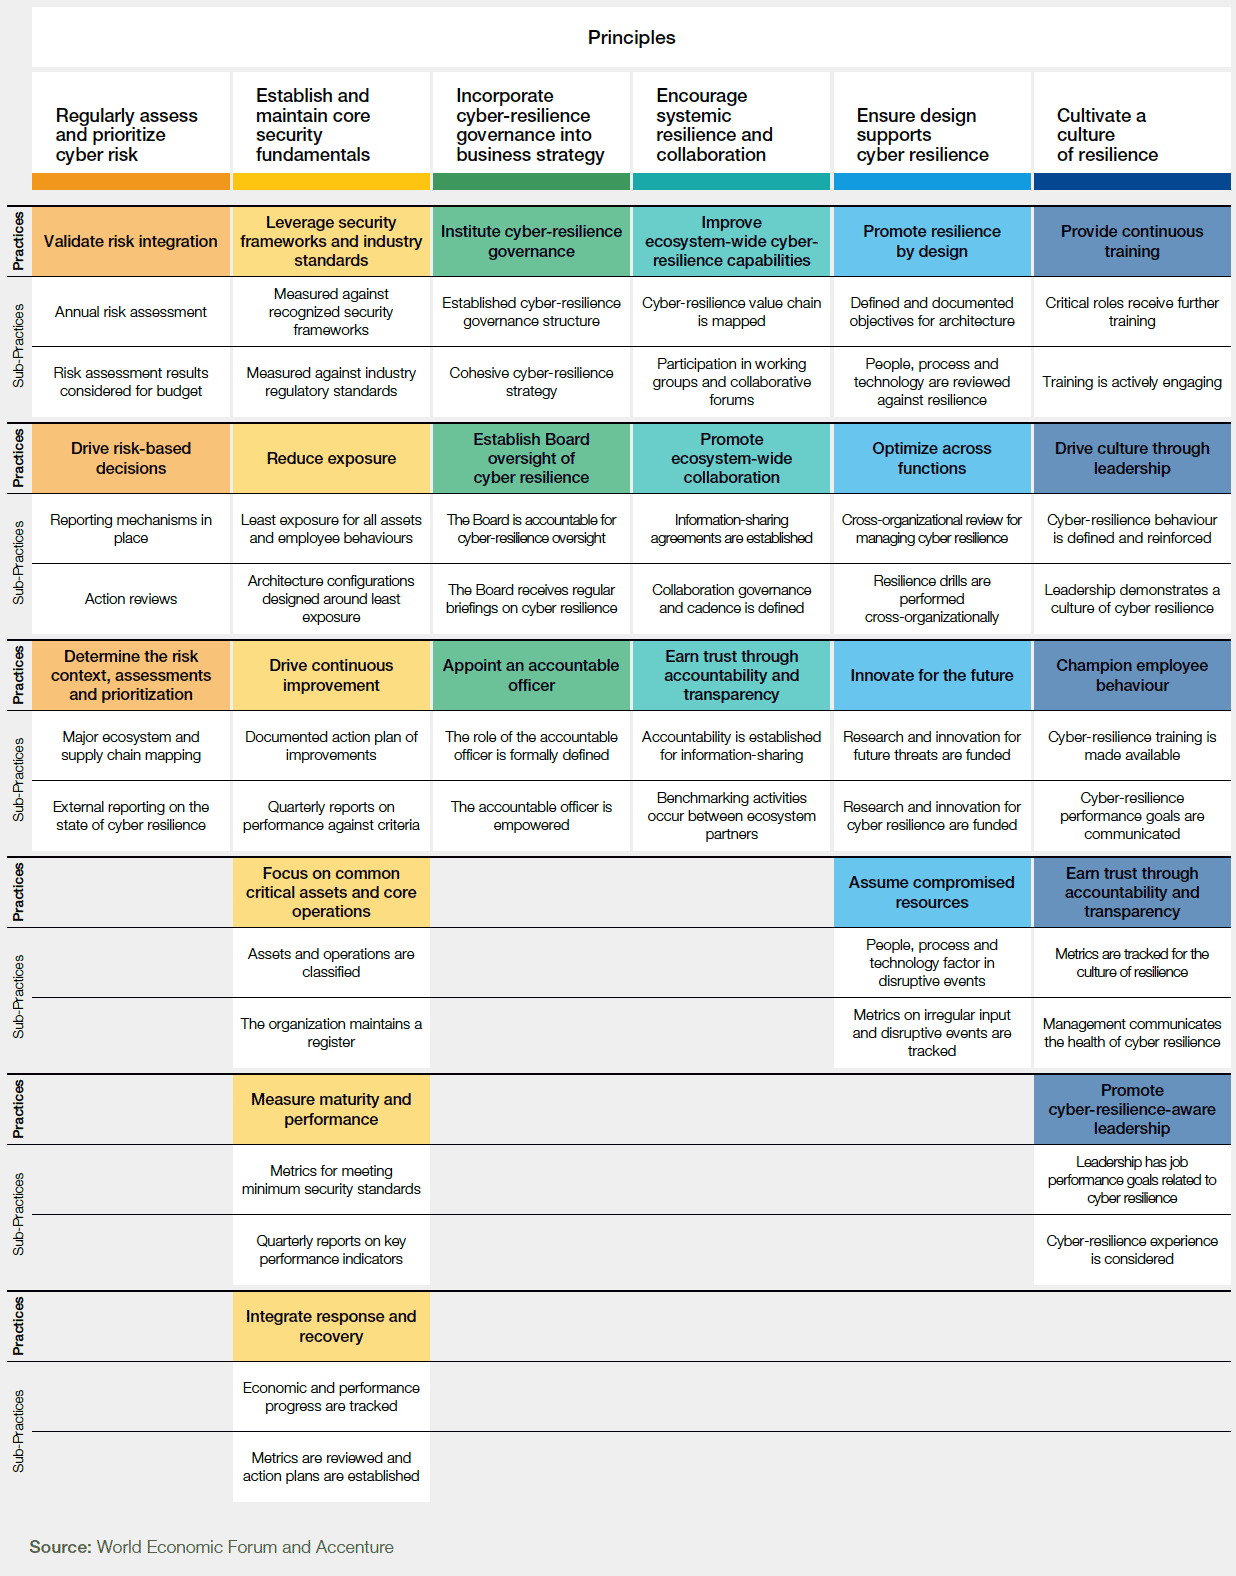 Fully Expanded Cyber Resilience Framework and Principles Diagram